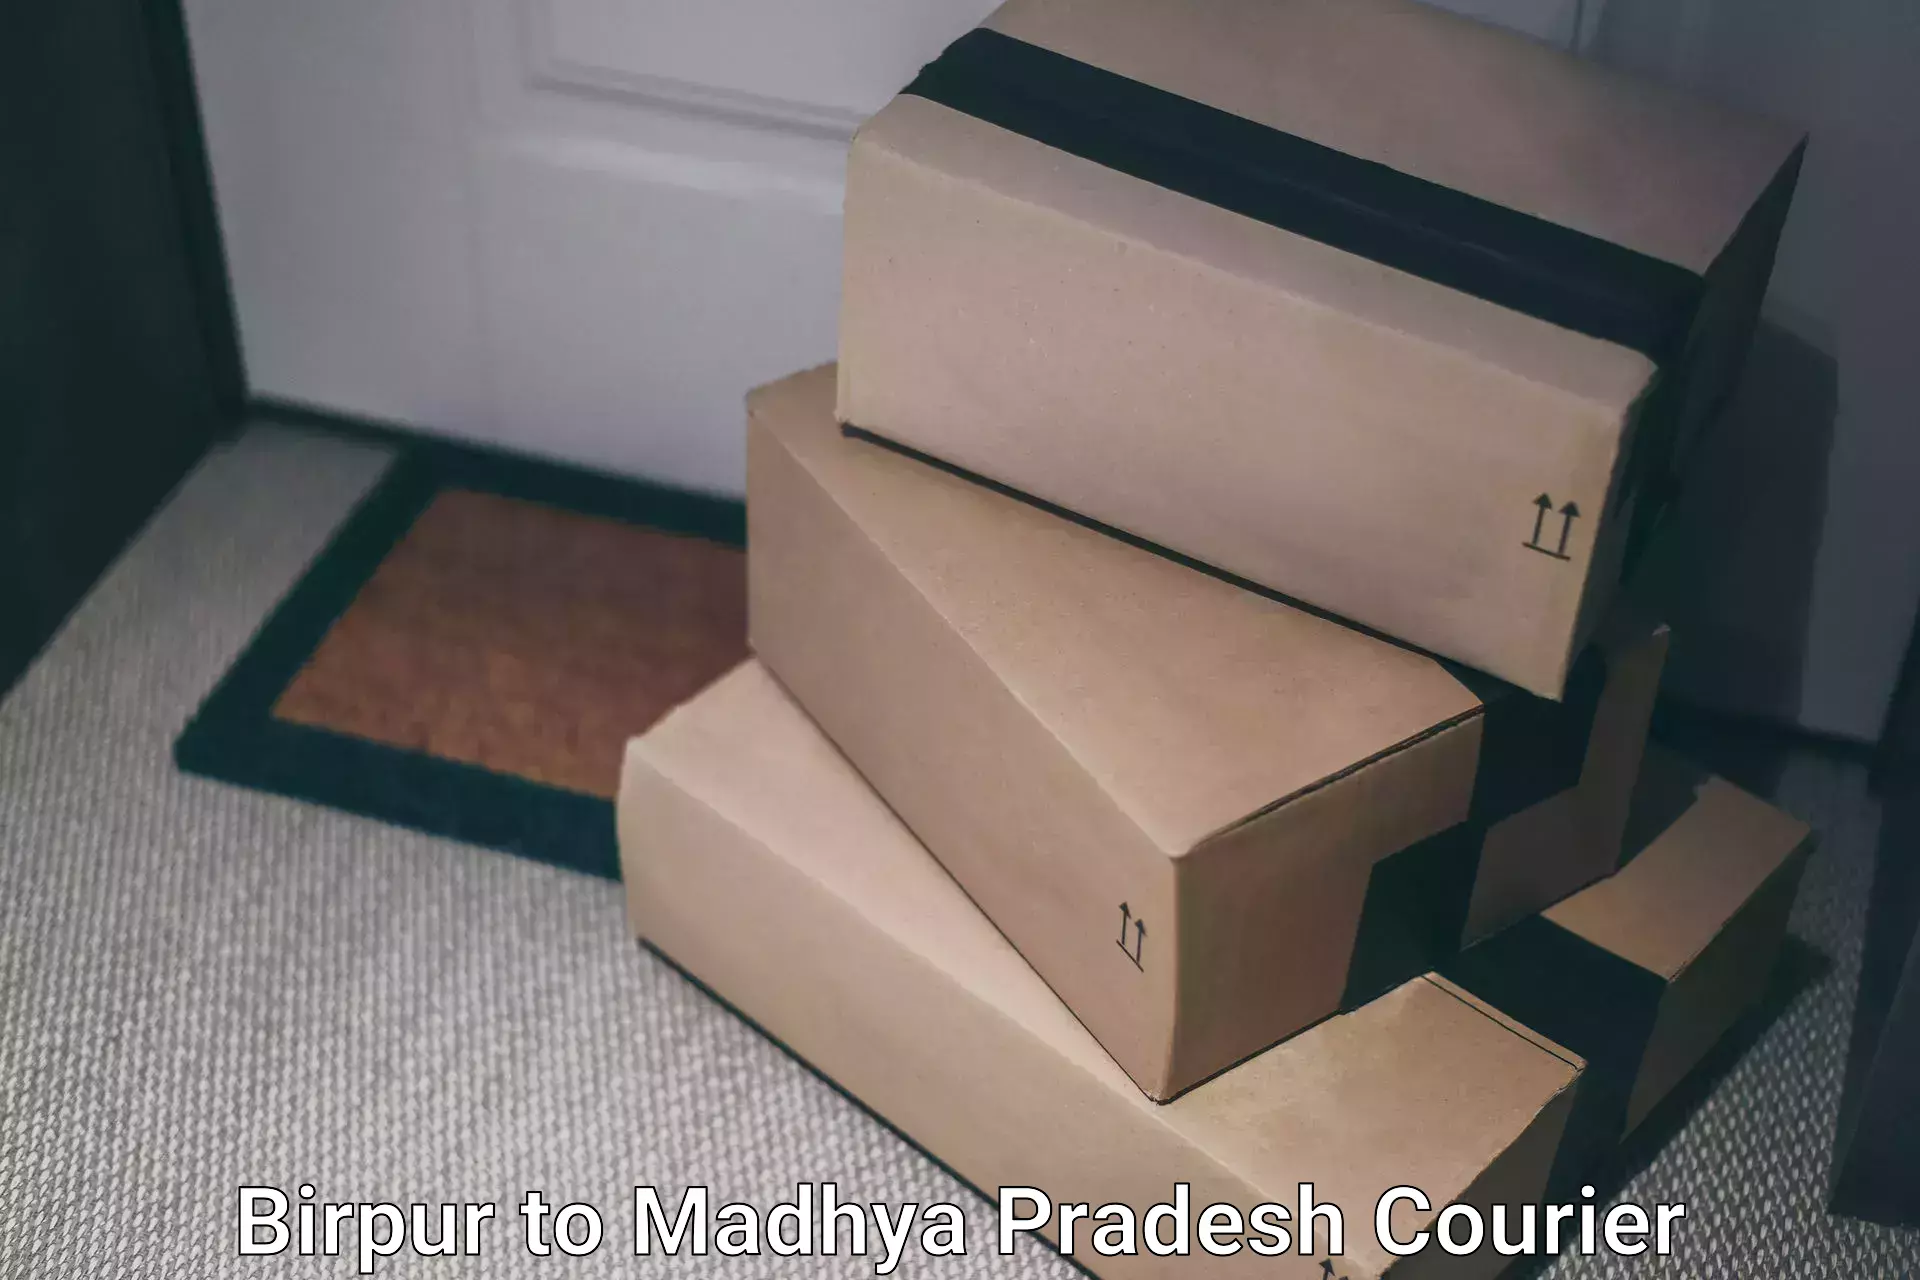 High-capacity courier solutions Birpur to Dewas